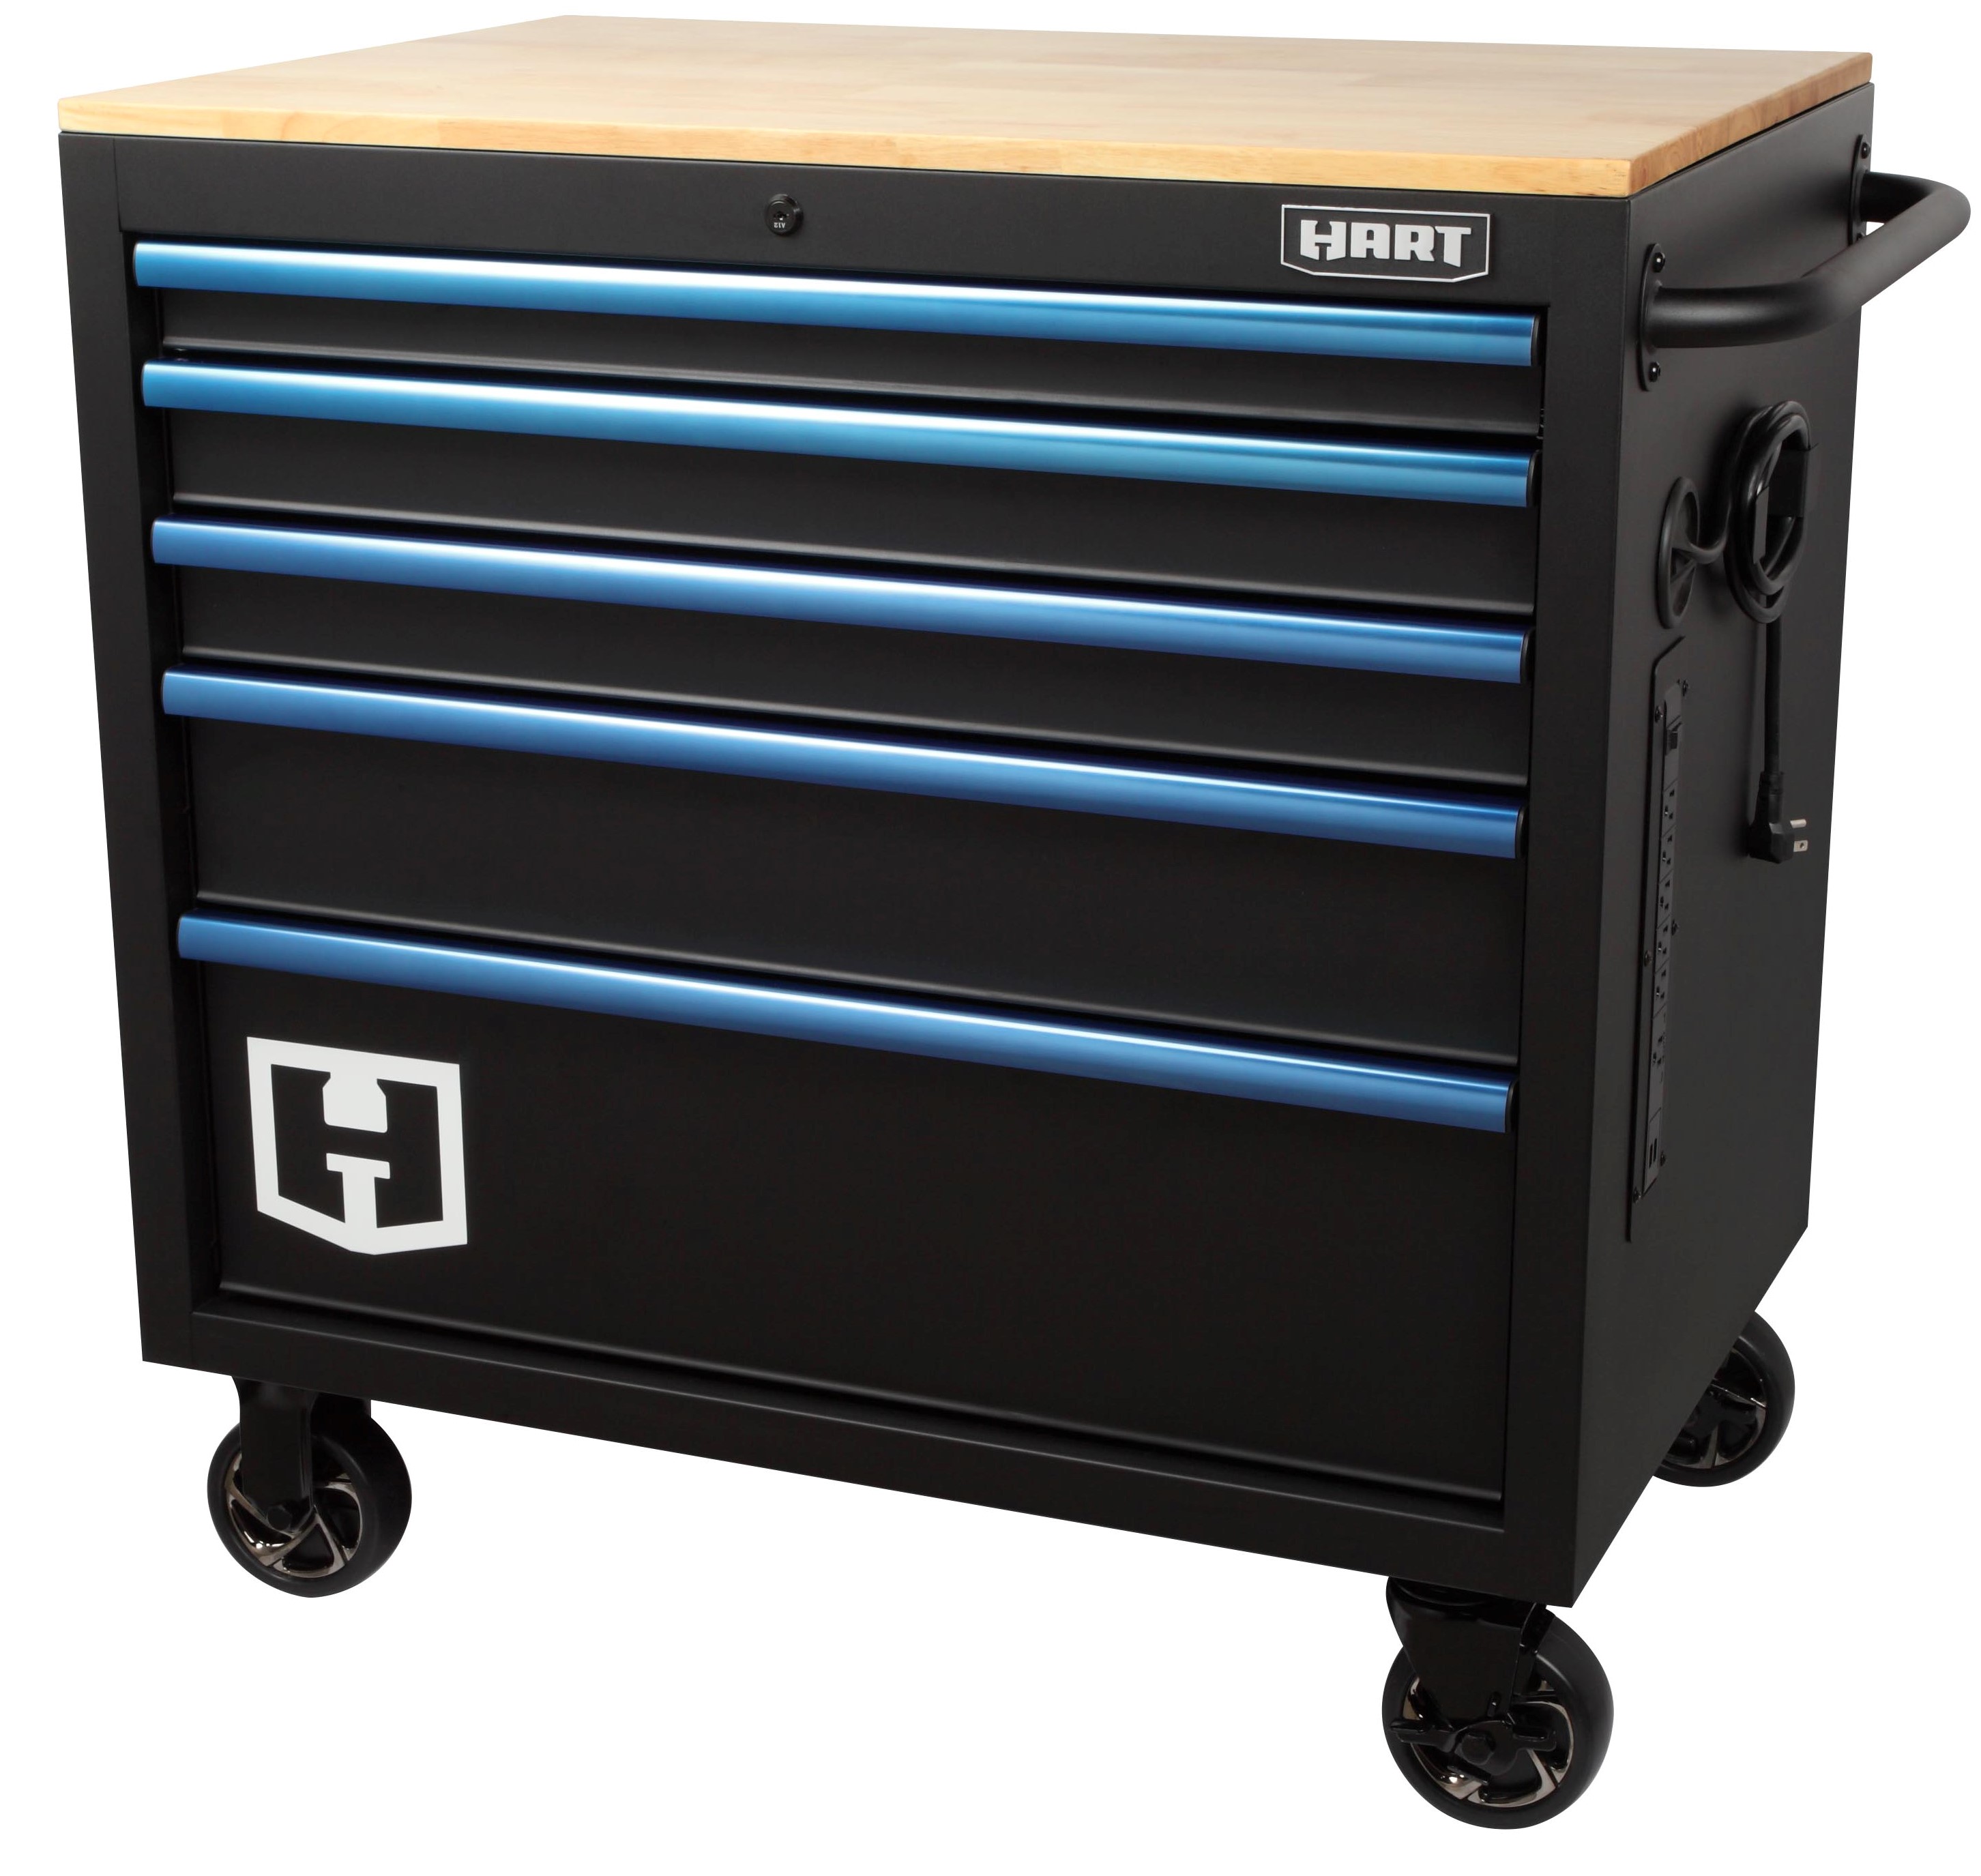 Hart 36in 5 Drawer Tool chest $199.97 YMMV at Walmart